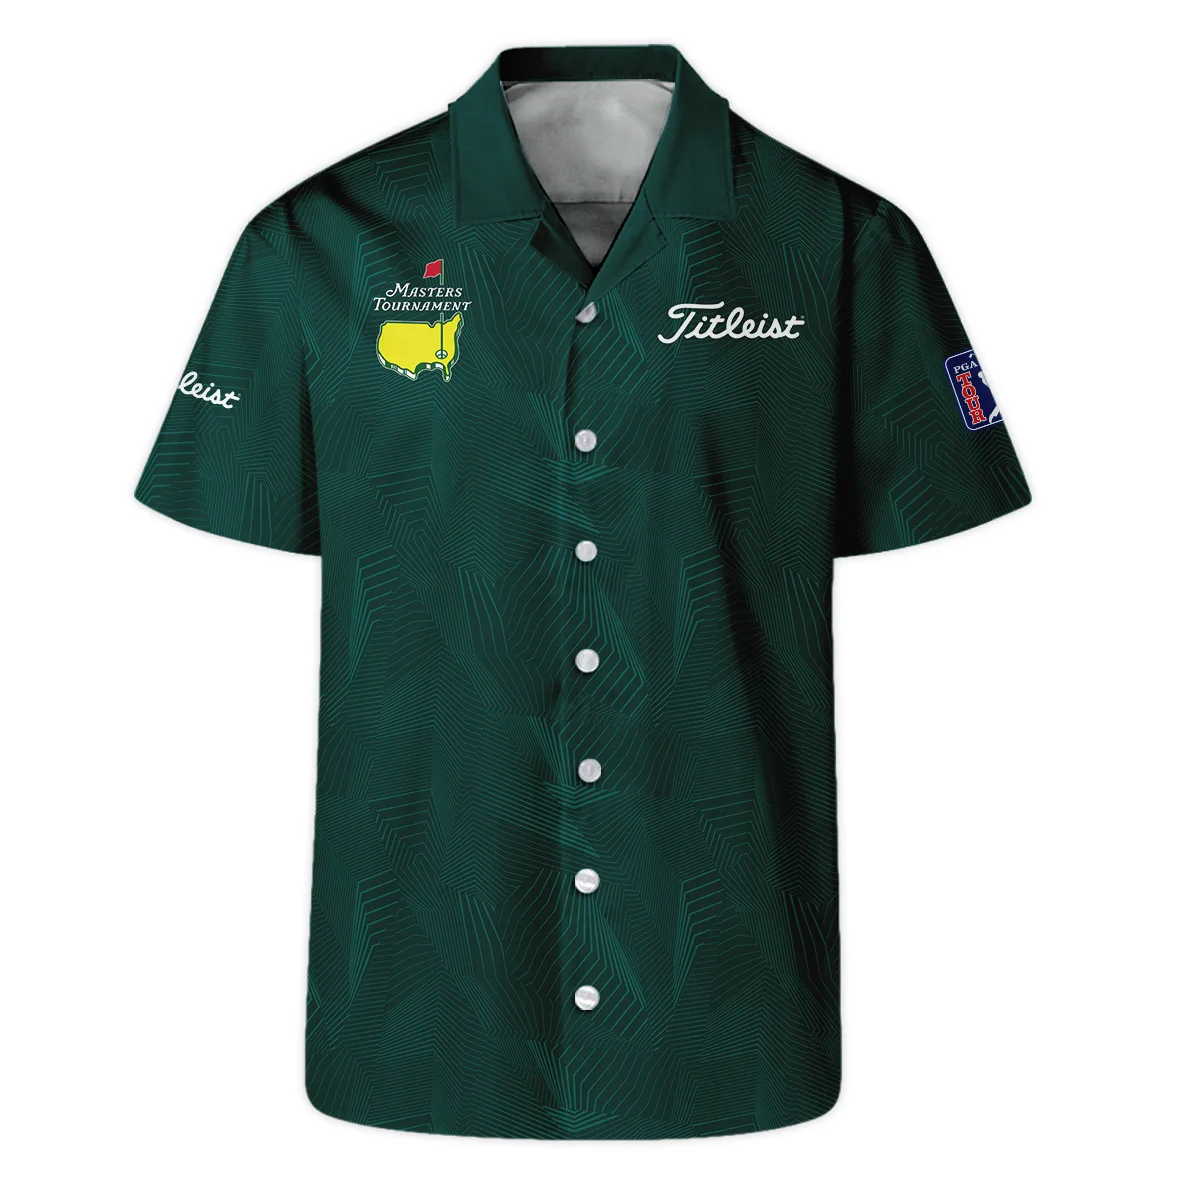 Abstract Pattern Lines Forest Green Masters Tournament Titleist Polo Shirt Style Classic Polo Shirt For Men